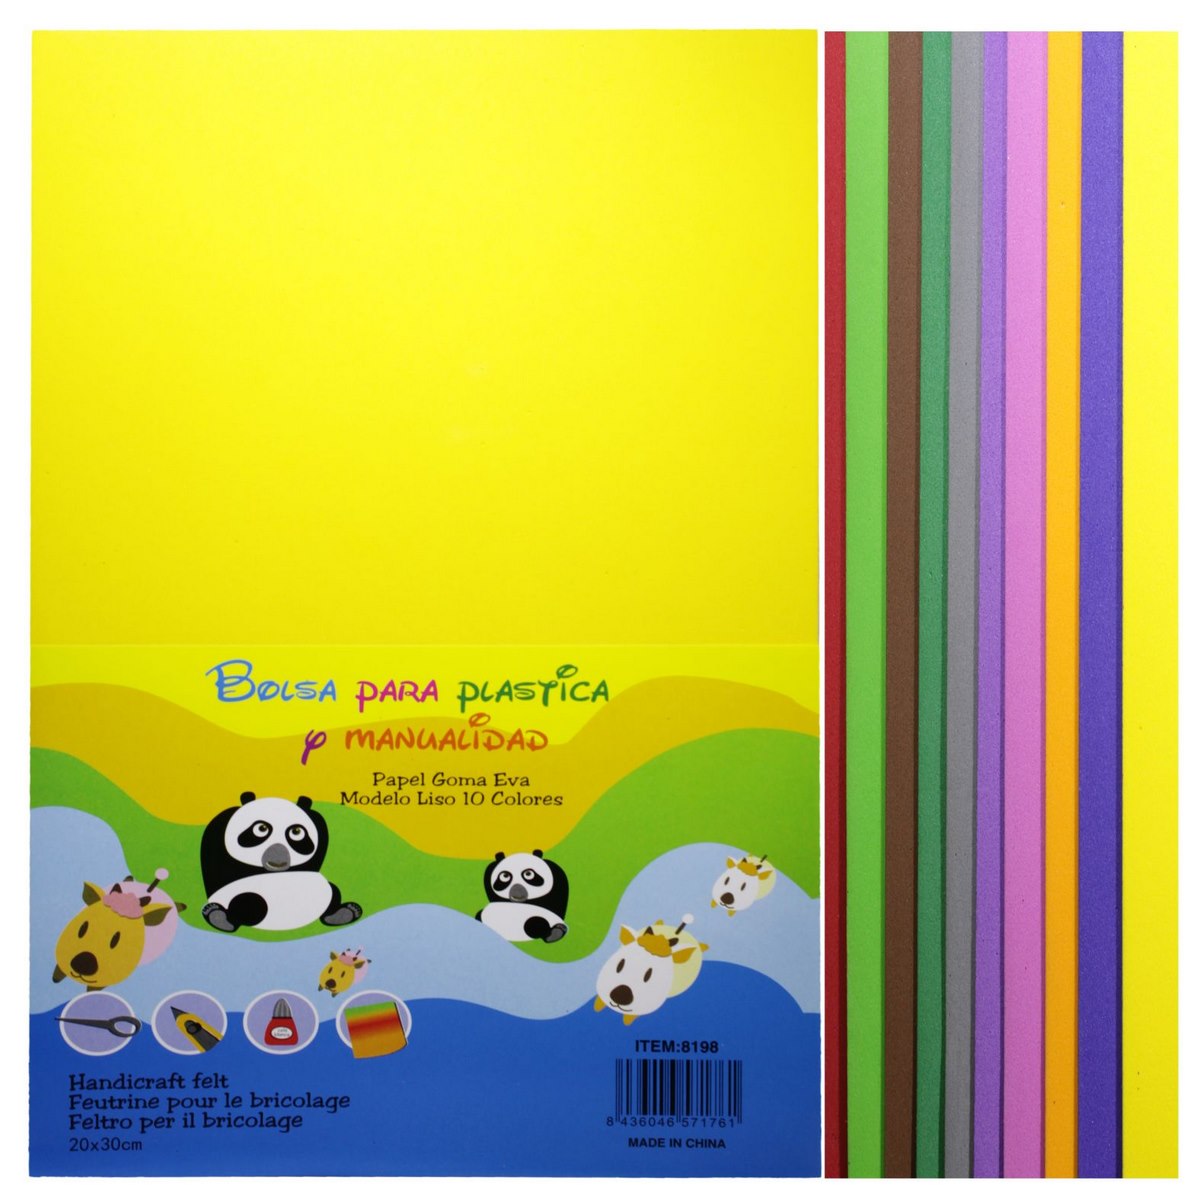 jags-mumbai Foam, Mount,Cork Sheet Colorful foam A4 sheets for hobby crafts and DIY- contain 10 unit